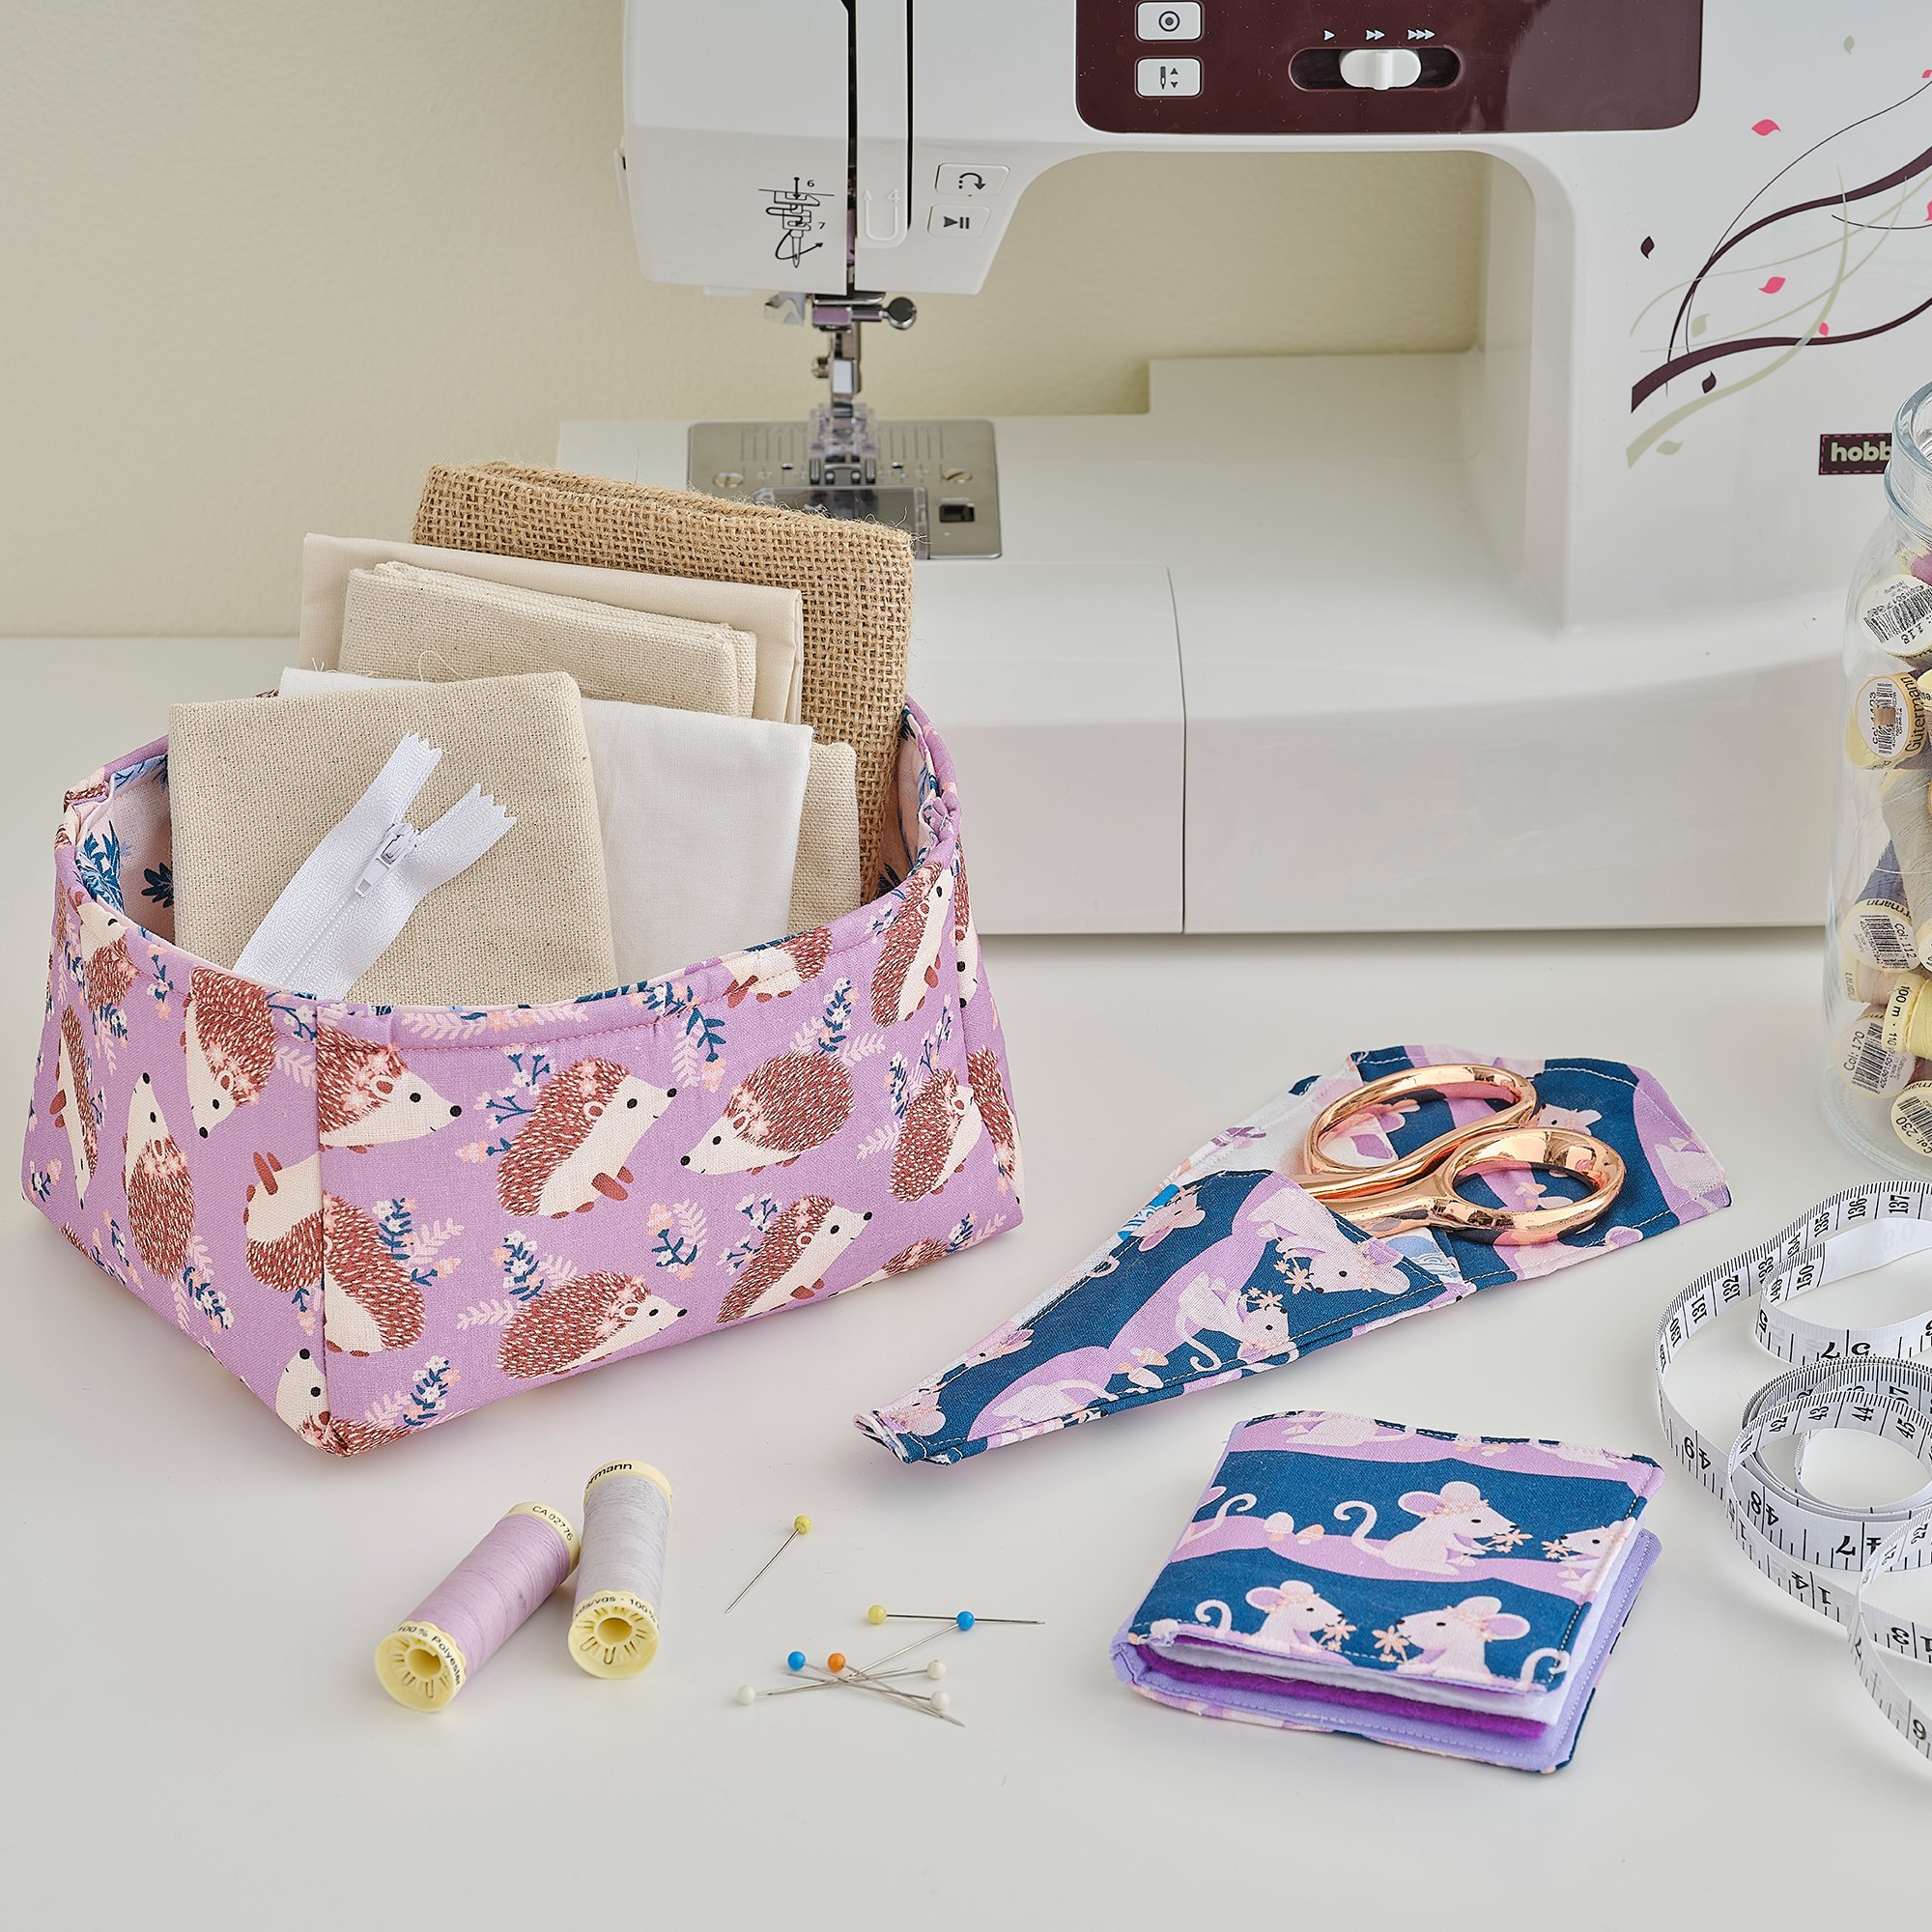 How to Make Fabric Sewing Accessories